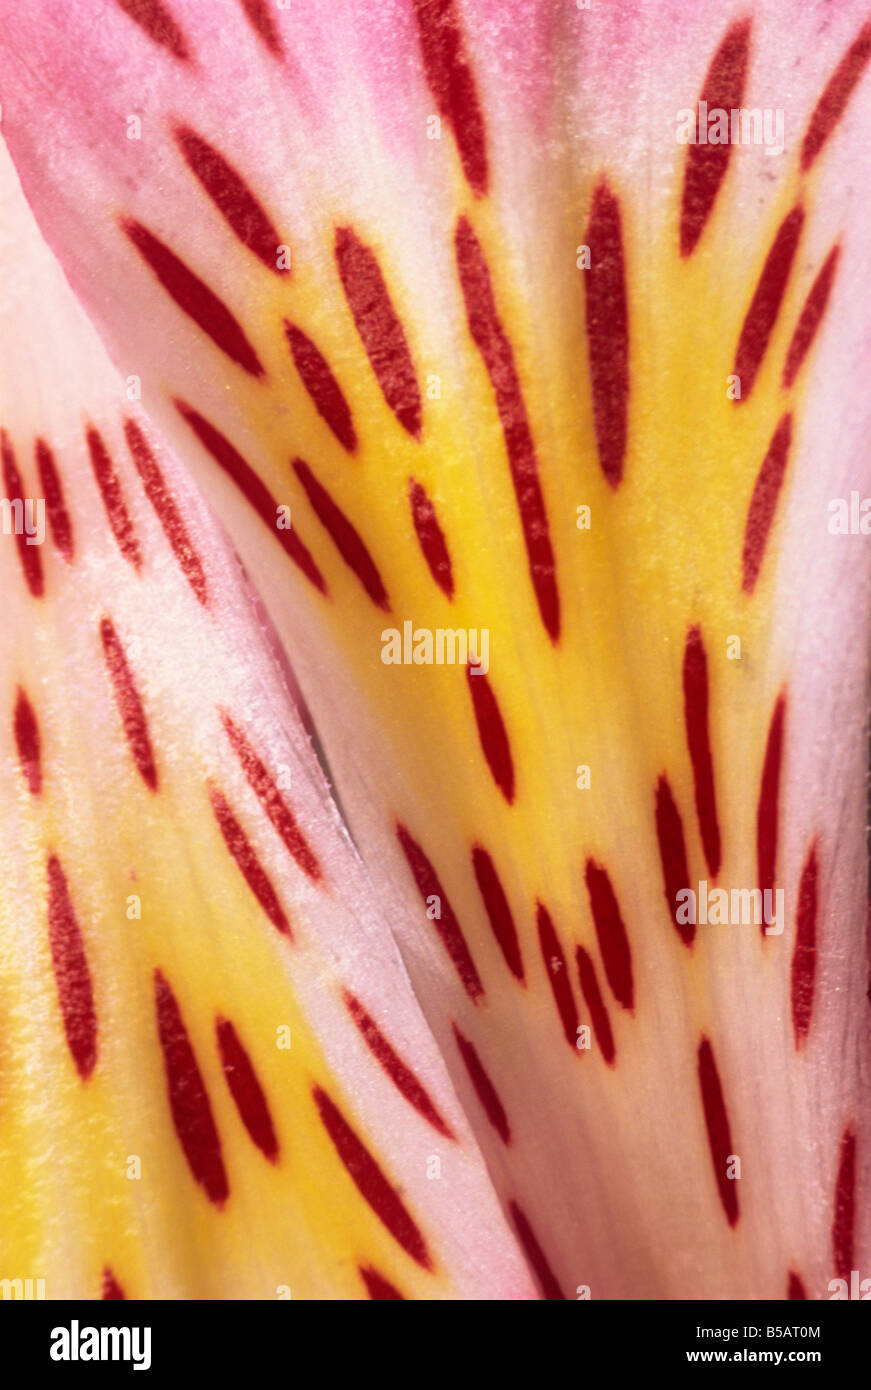 Abstract patterns and designs of the flower petals of a pink alstromeria L Murray Stock Photo